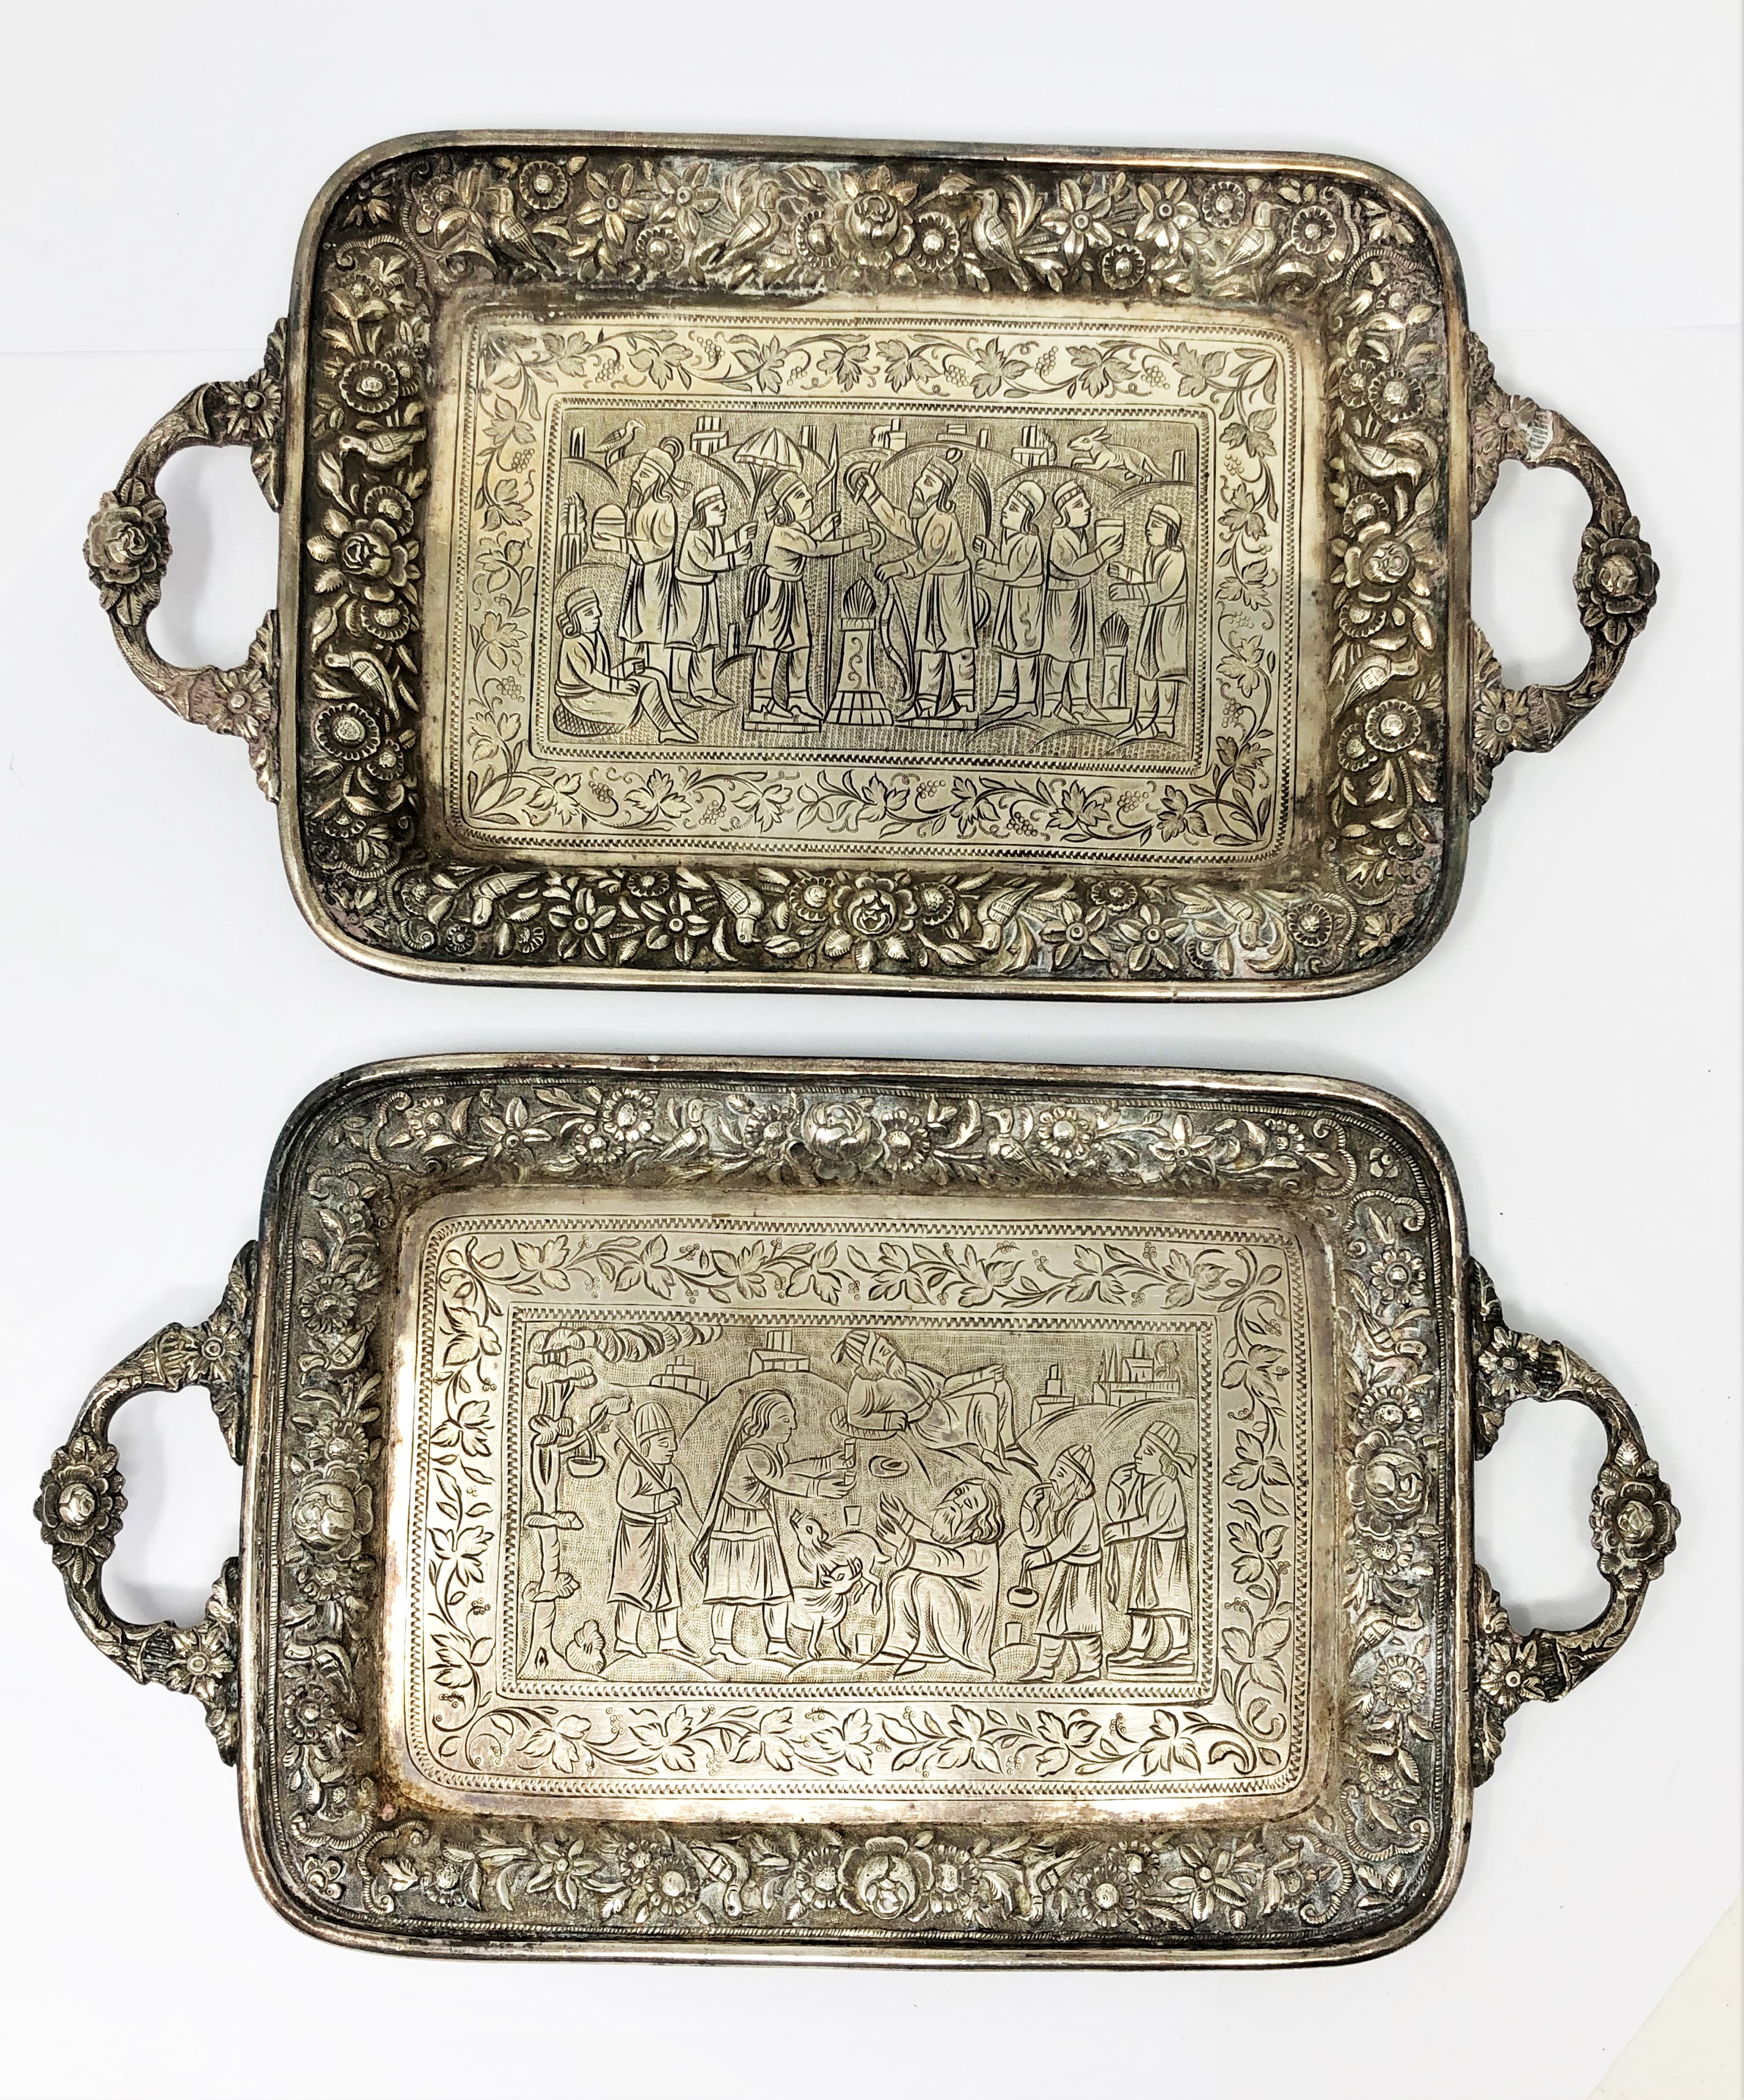 A PAIR OF MINIATURE SILVER TRAYS, PERSIA, CIRCA 1900